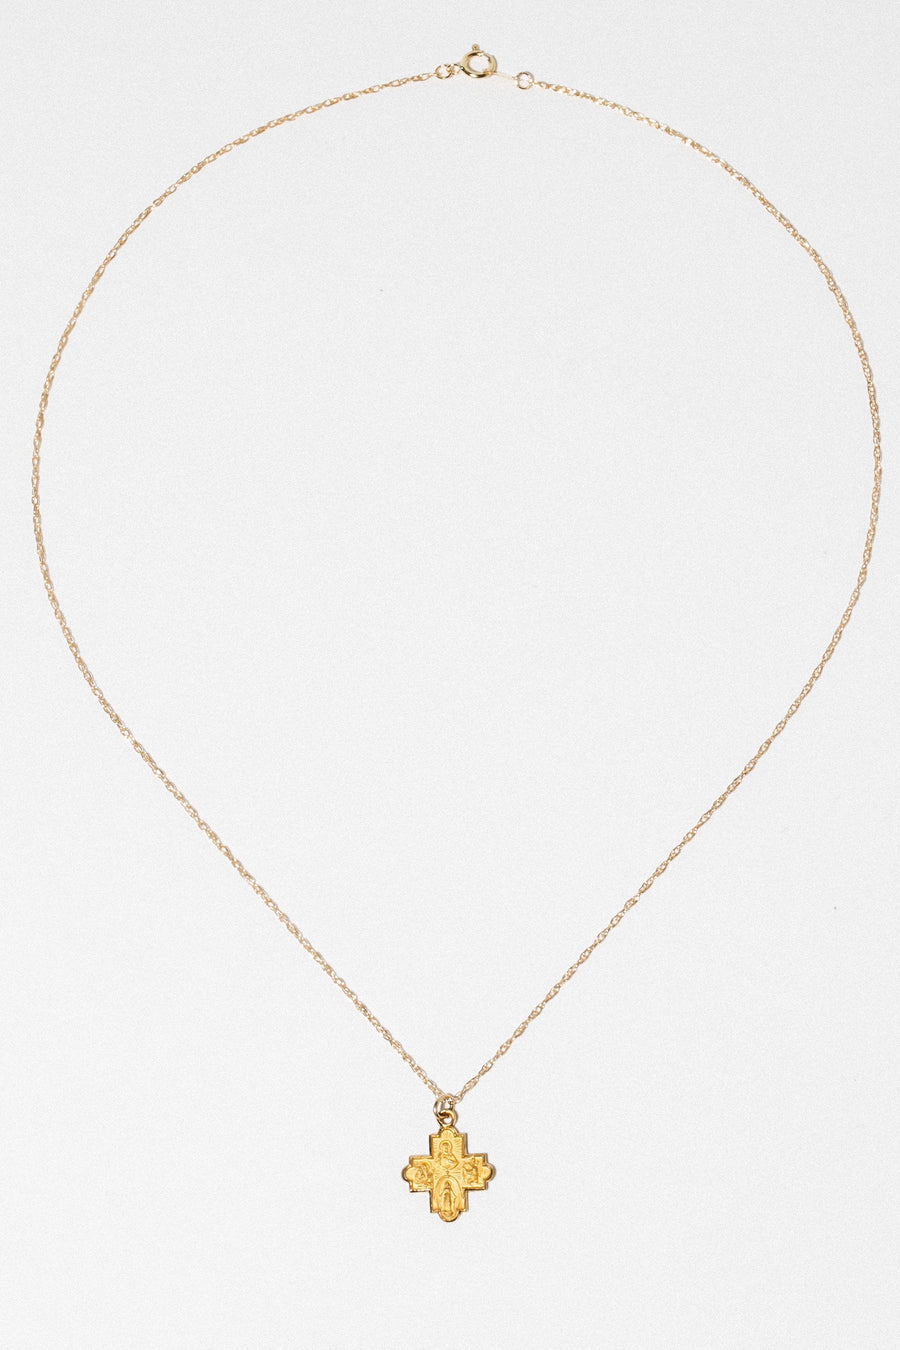 Stuller Jewelry Gold / 16 Inches 14kt Raphael Necklace